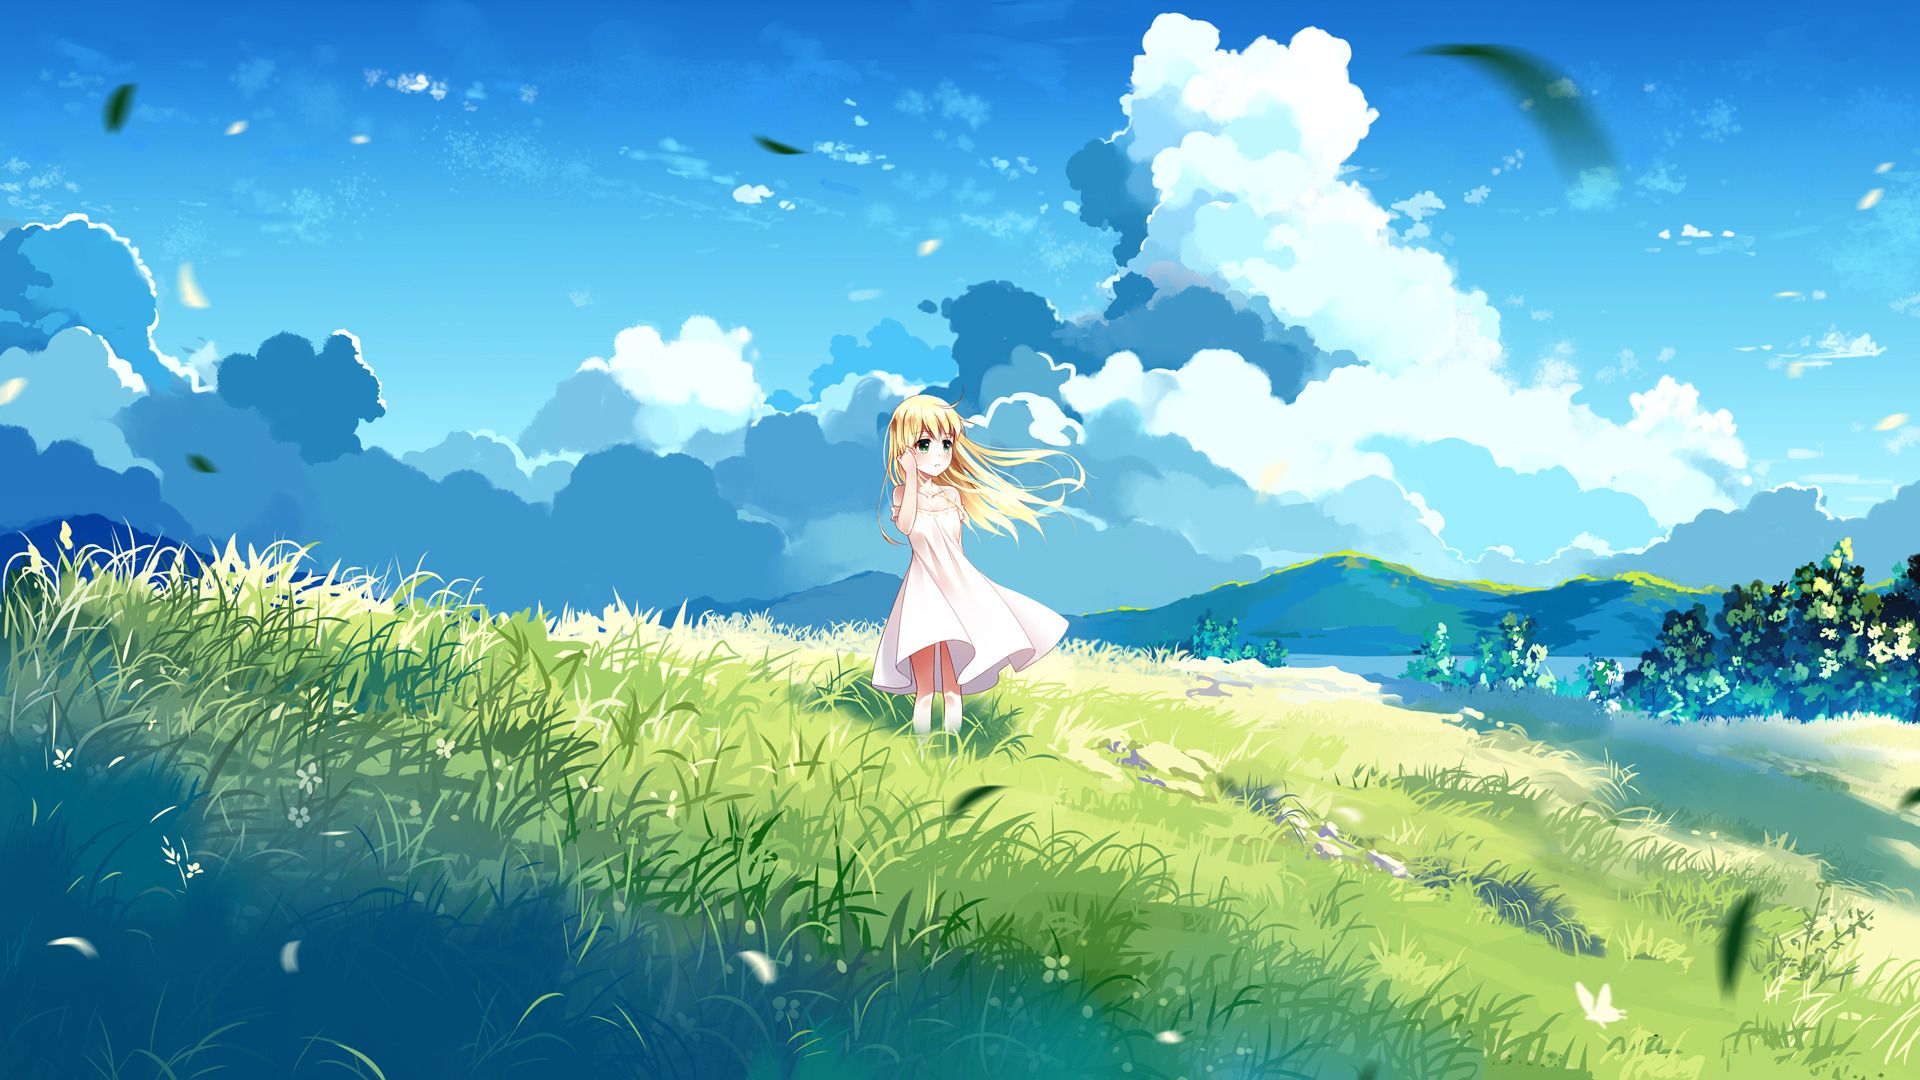 Anime girl rredhead closed eyes feathers windy profile view painting  wallpaper | 2560x1440 | 1402115 | WallpaperUP